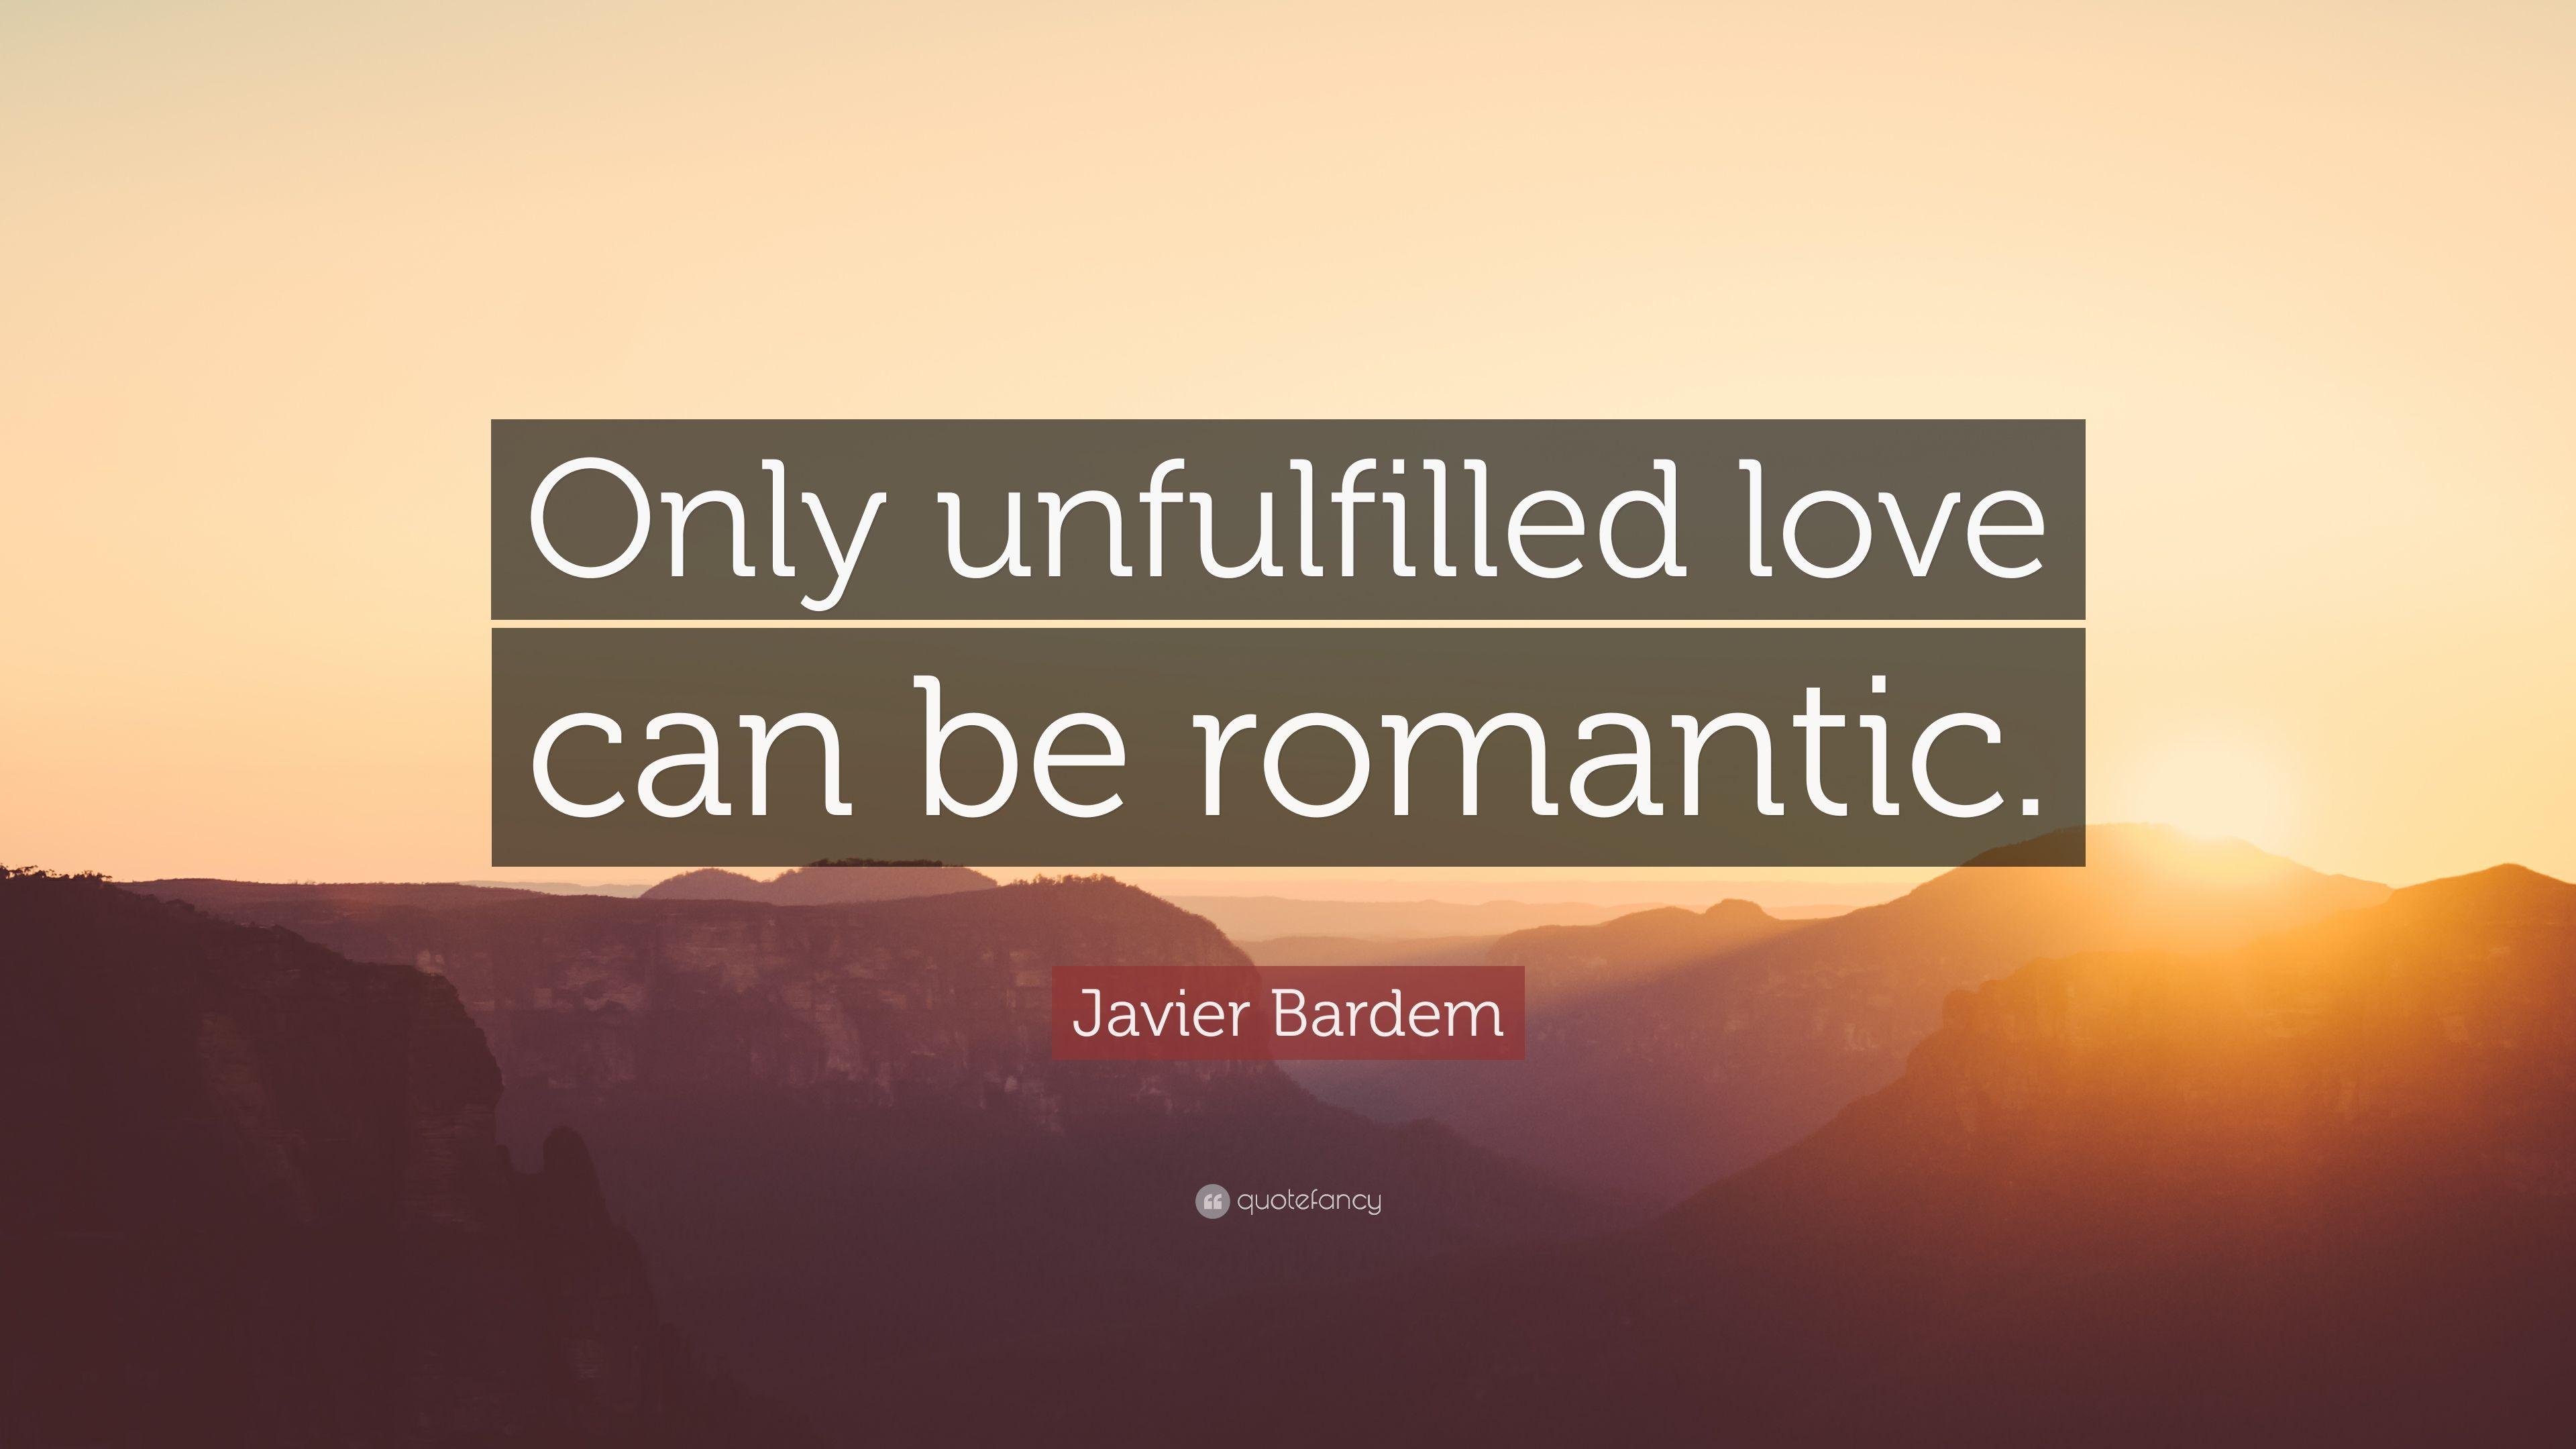 Javier Bardem Quote: “Only unfulfilled love can be romantic.” 7